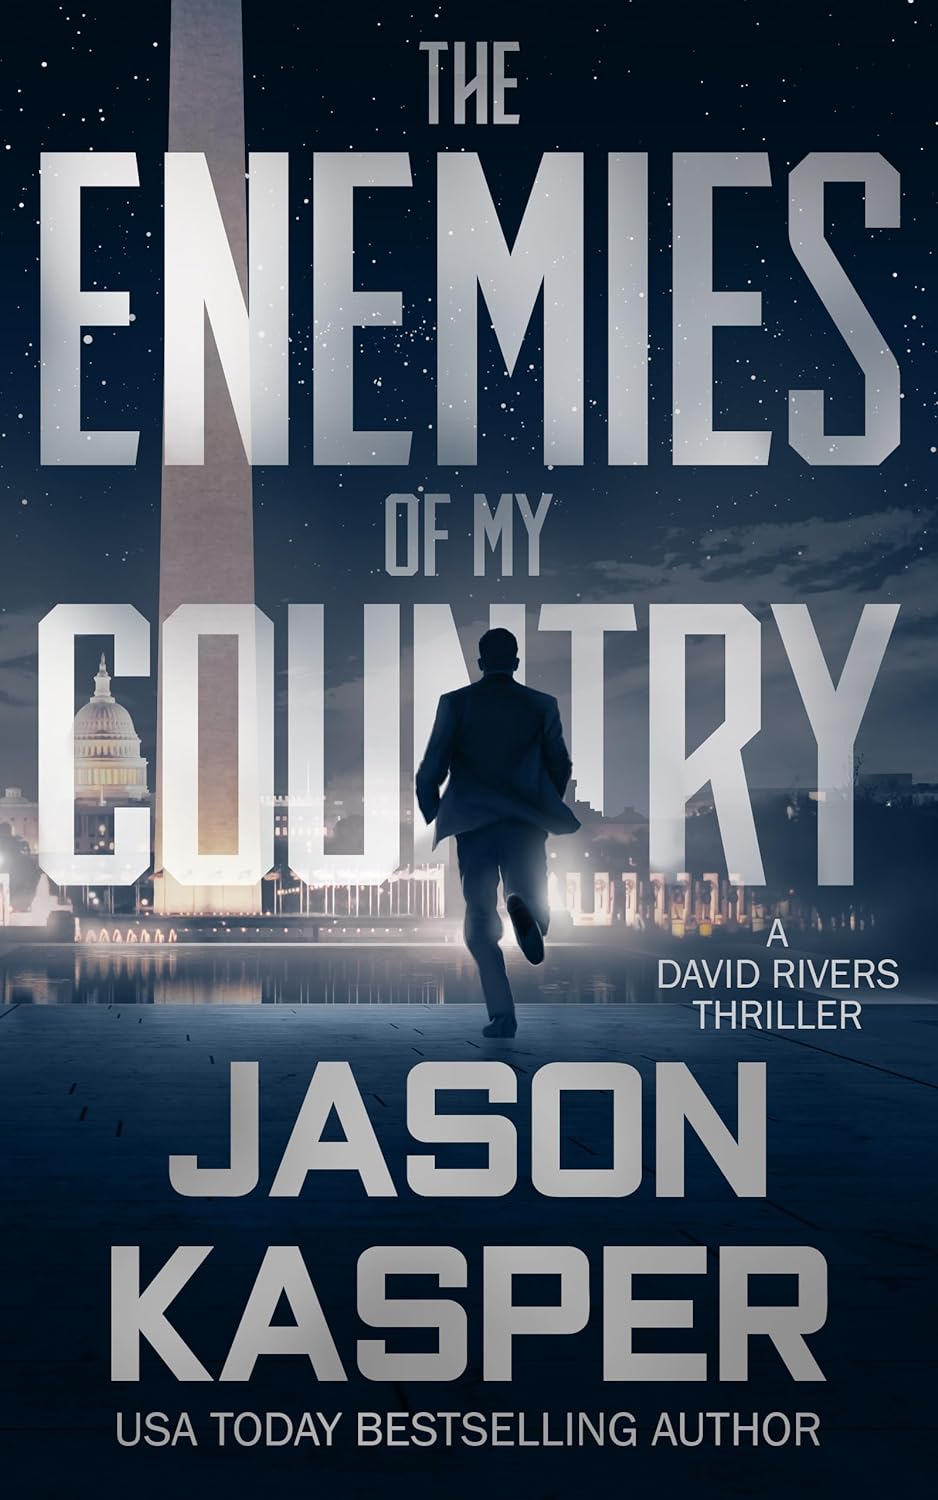 The Enemies of My Country by Jason Kasper